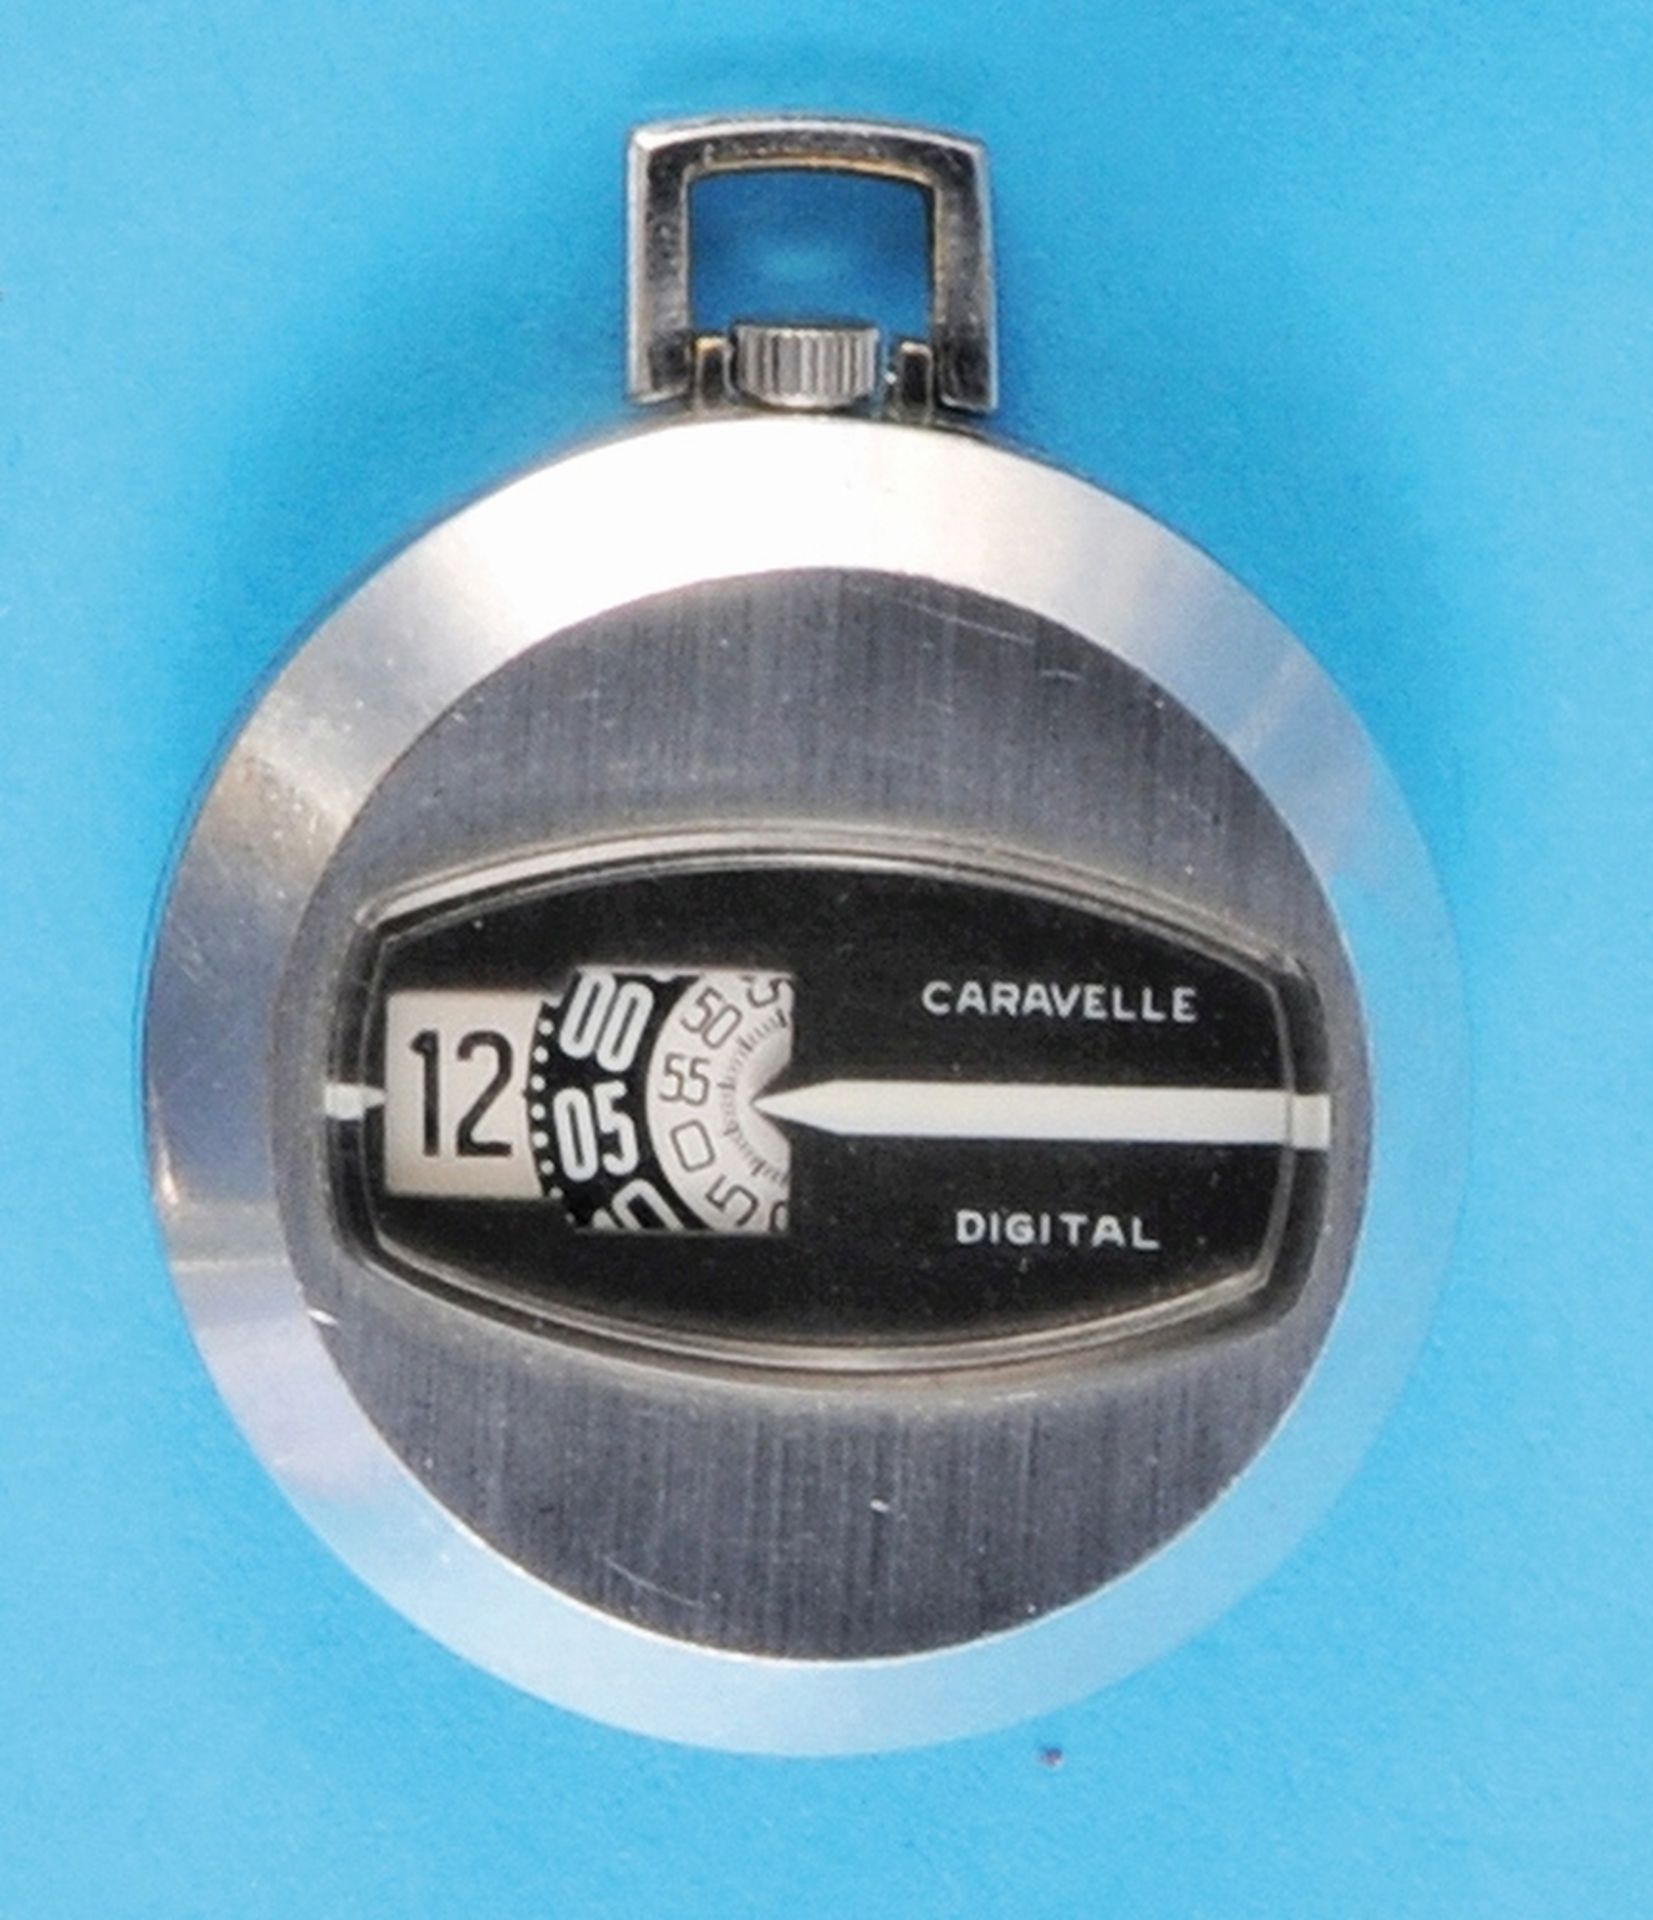 Caravelle Digital, pocket watch with digital display for minute, second and jumping hour, 